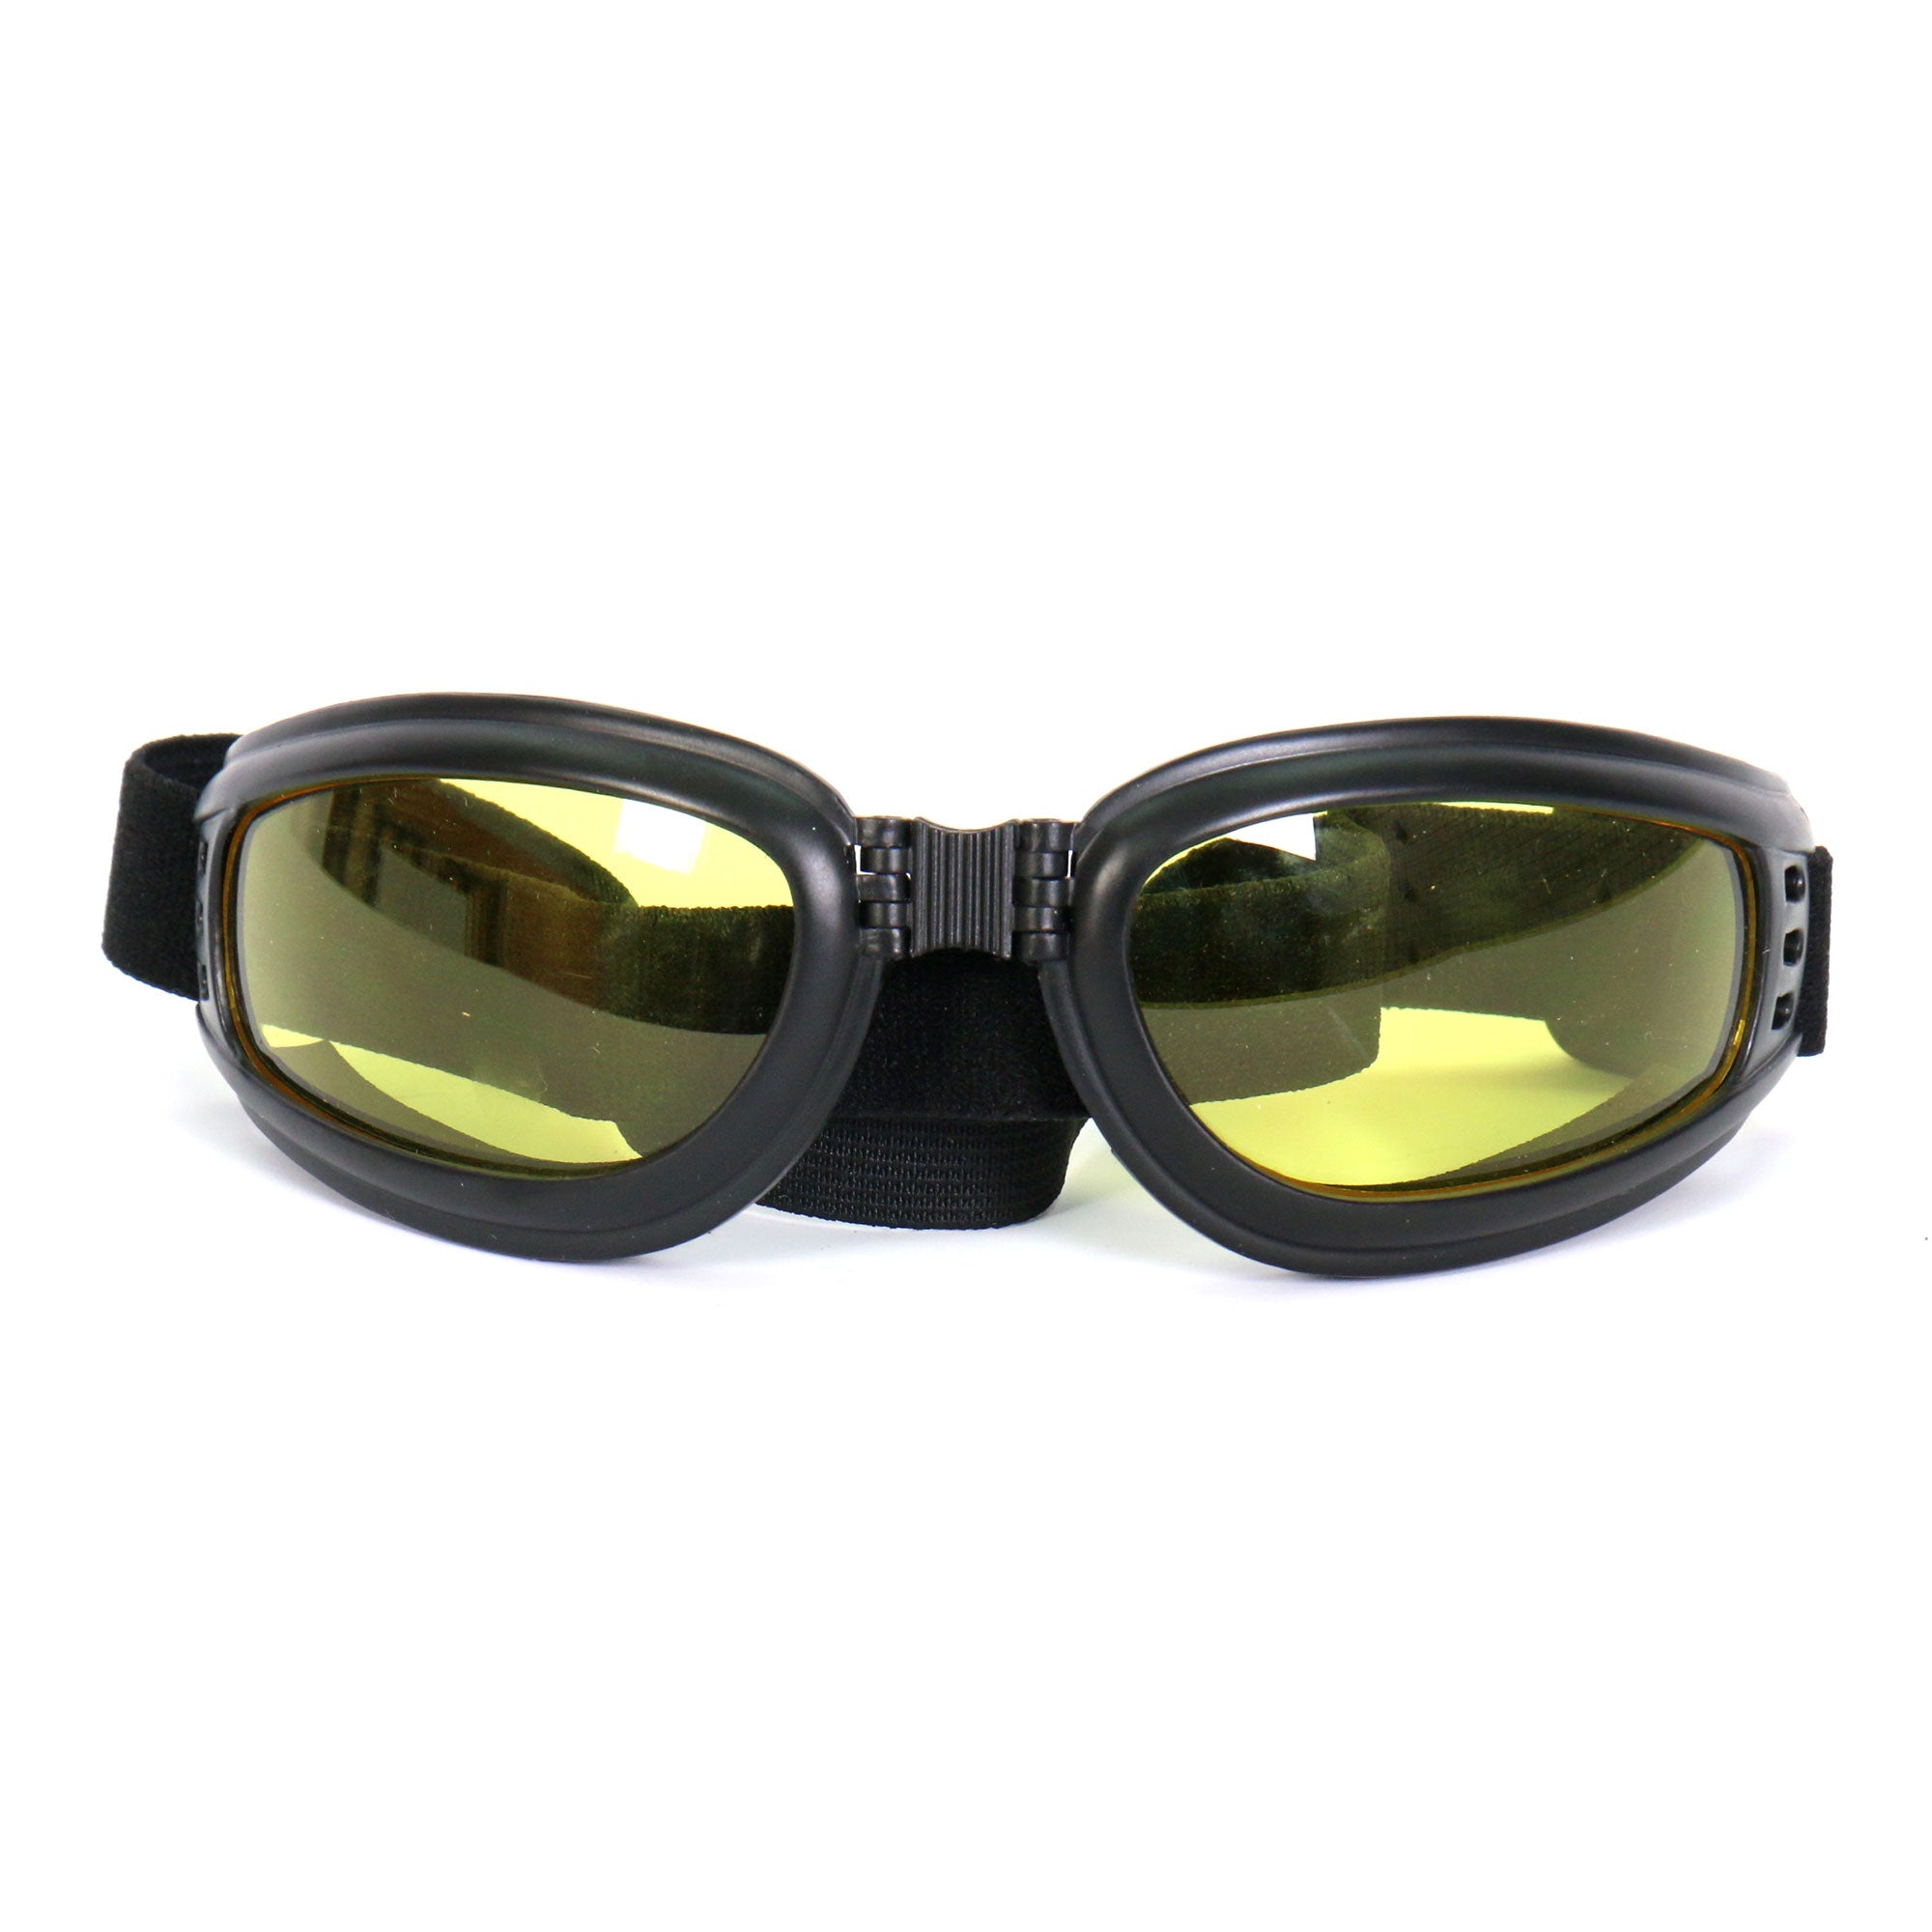 Hot Leathers SGG1017 Yellow Nomad Sunglasses/Goggles